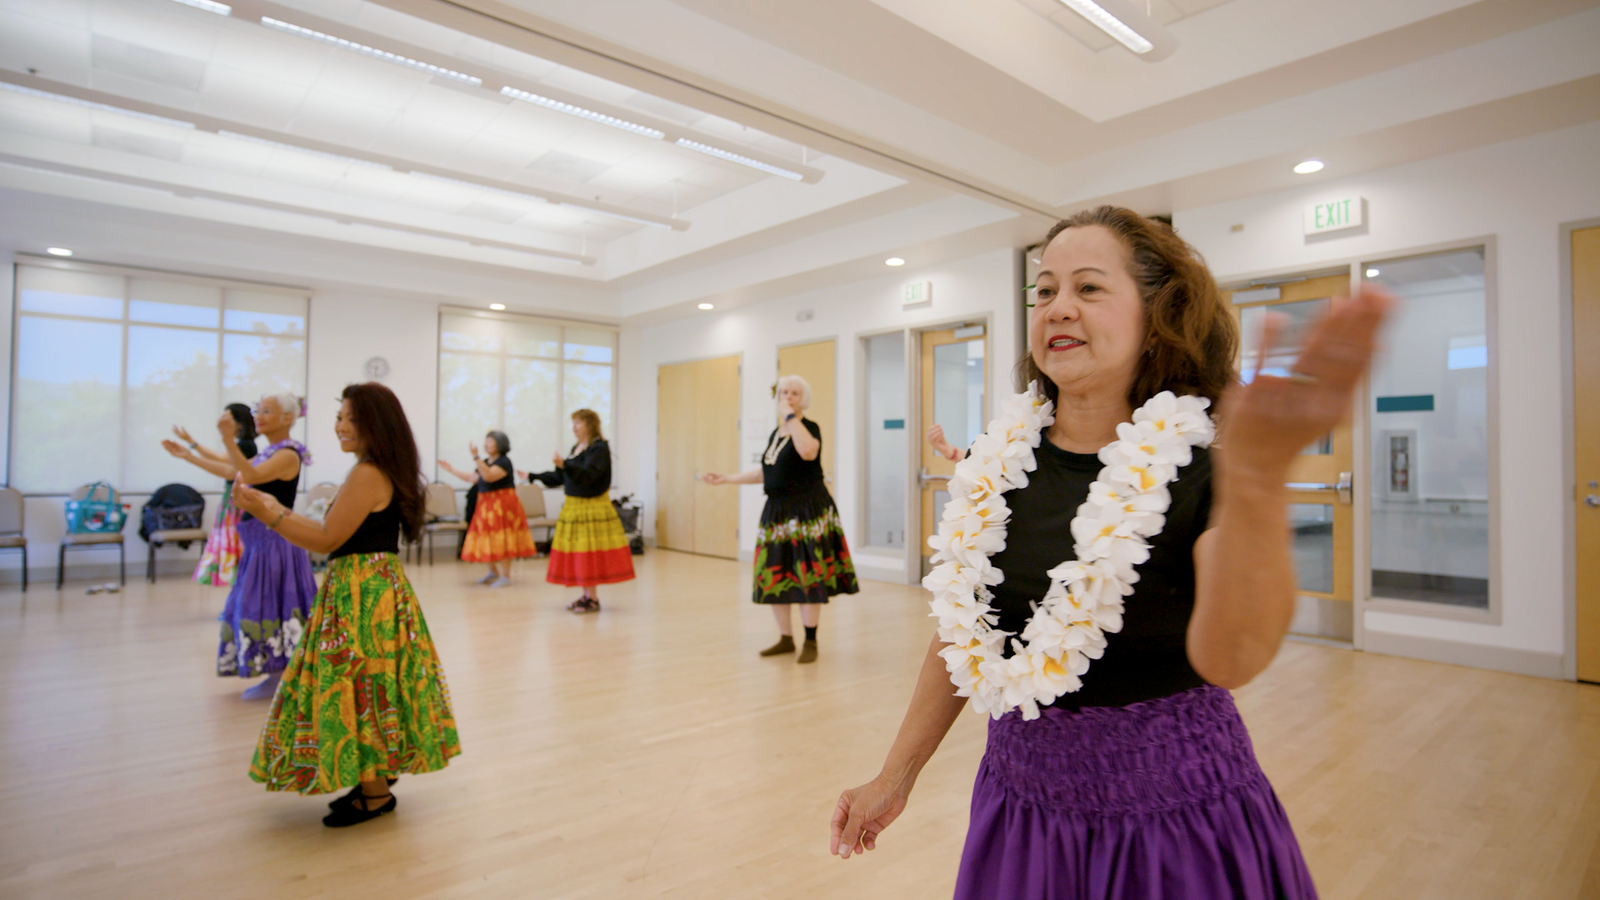 These seniors are learning Hula and celebrating Hawaiian culture [Video]